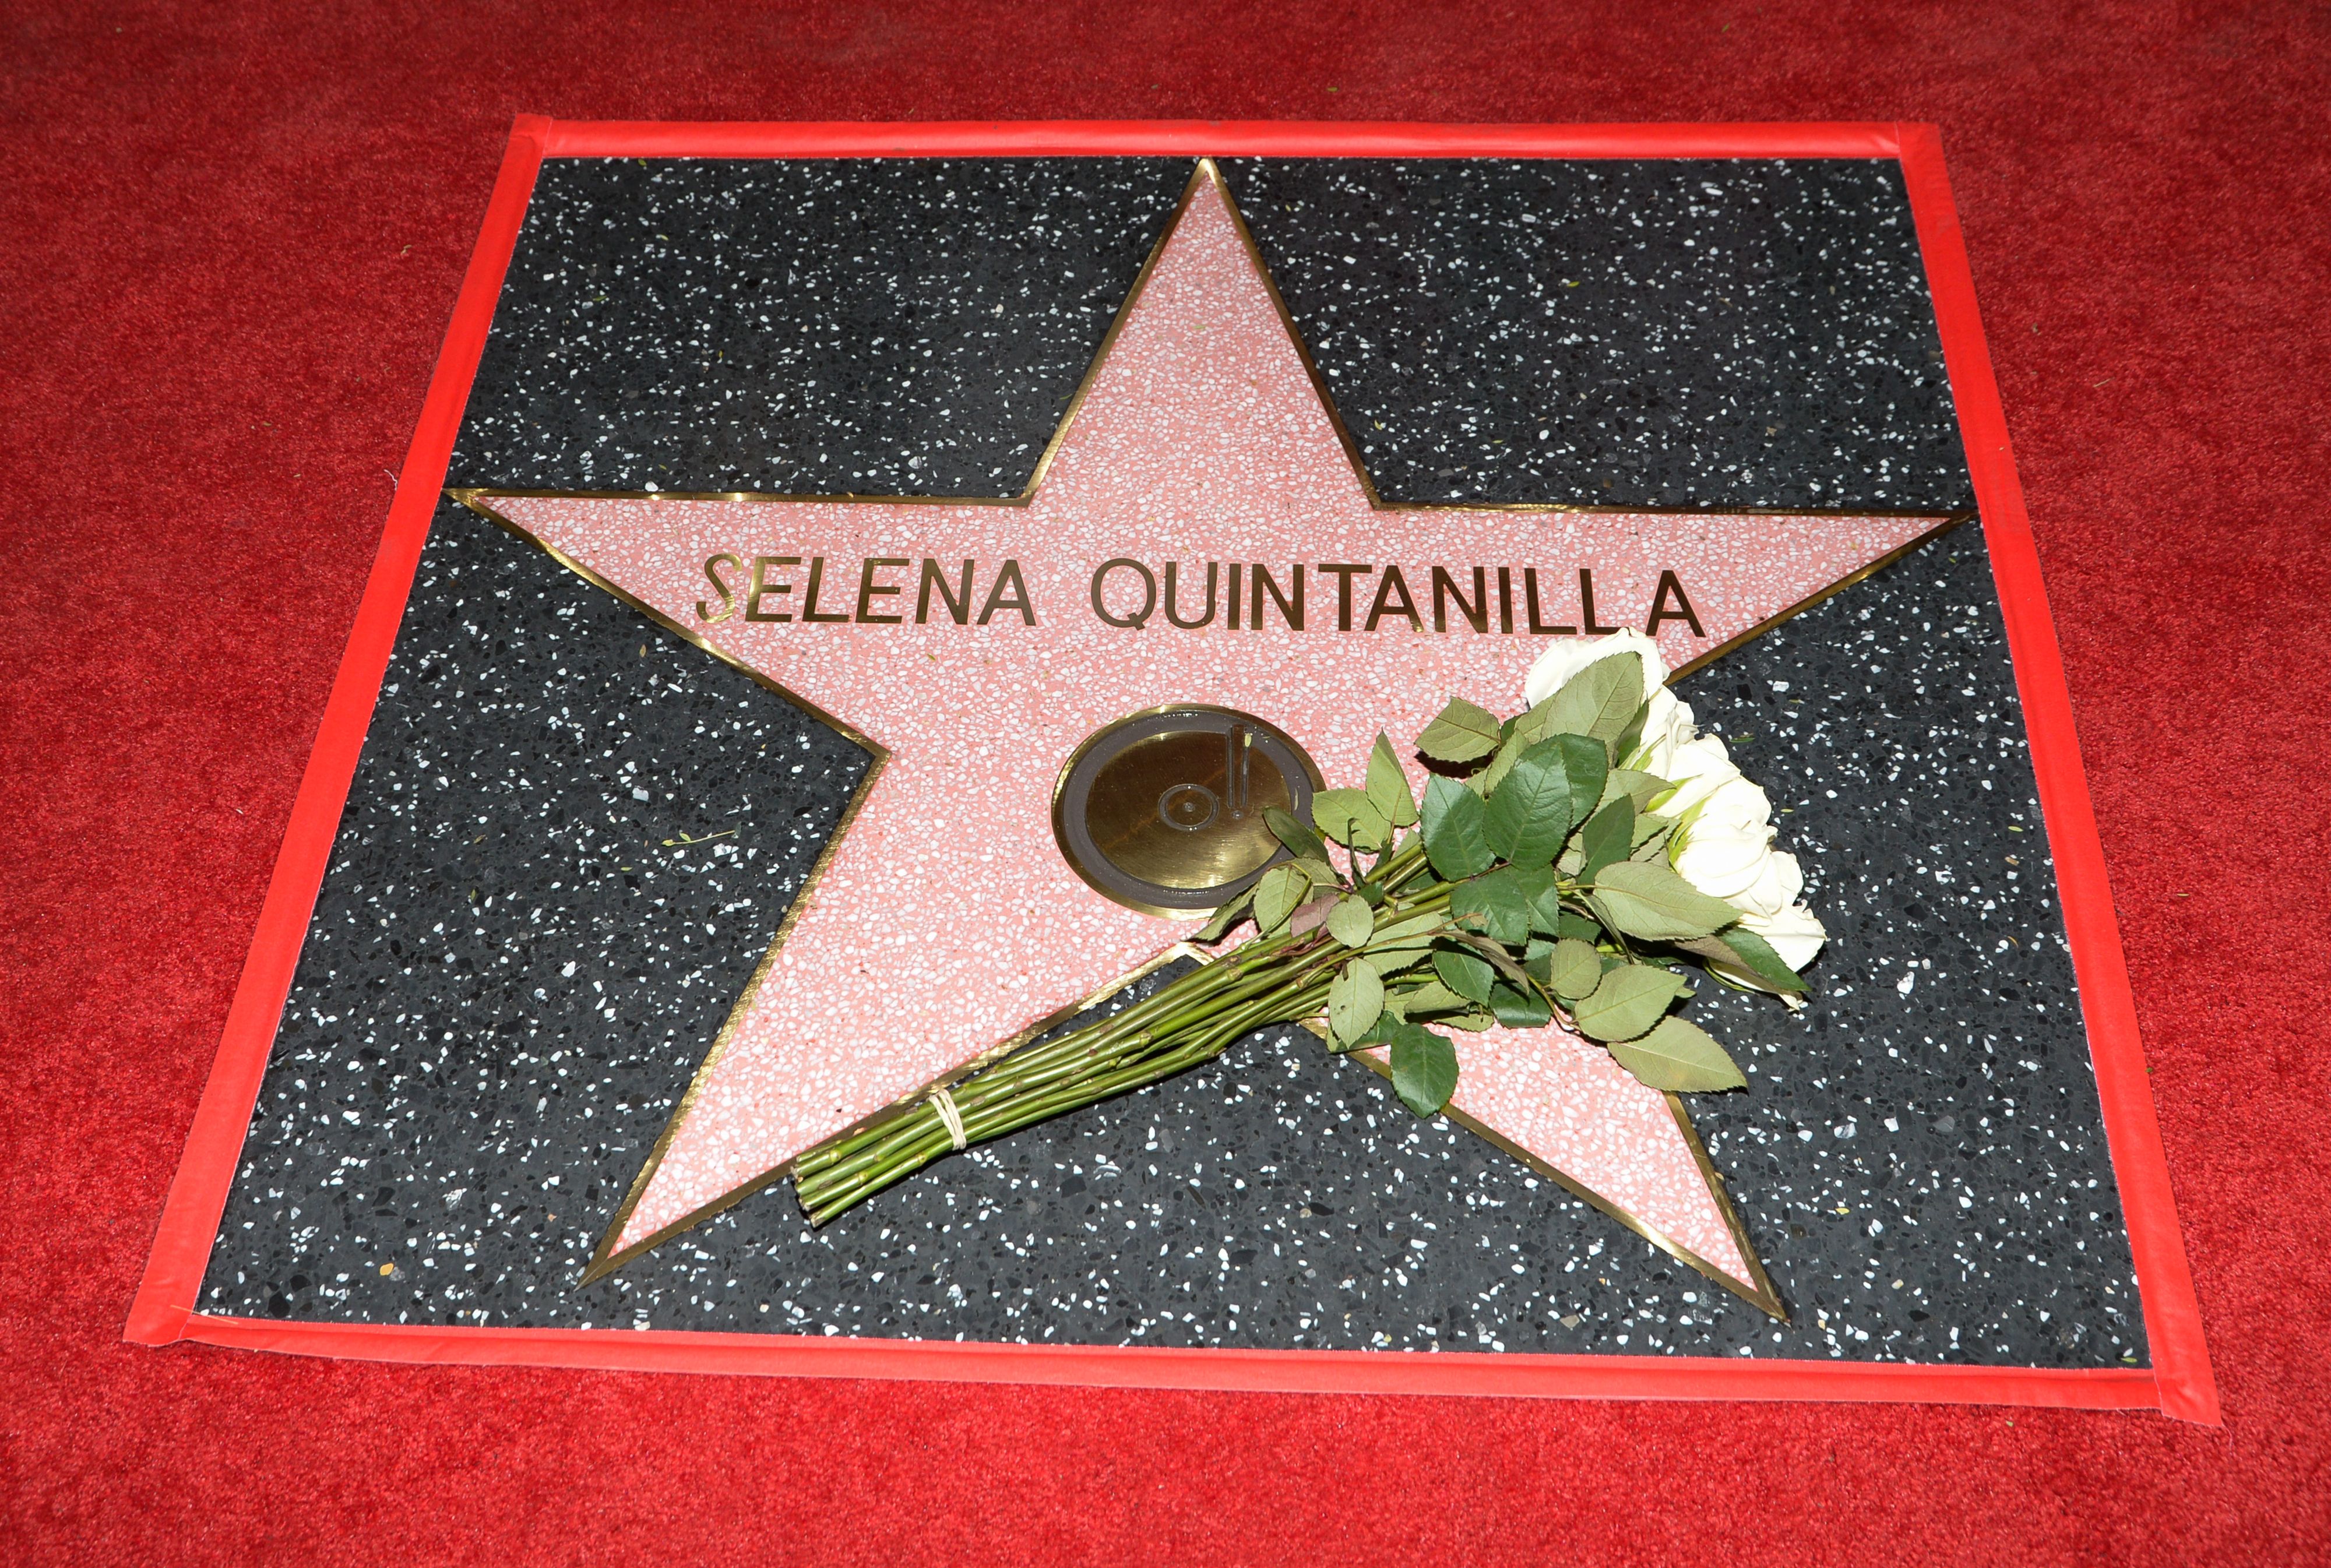 Singer Selena Quintanilla is honored posthumously with a Star on the Hollywood Walk of Fame on November 3, 2017, in Hollywood, California. (Photography by Tara Ziemba—AFP/Getty)